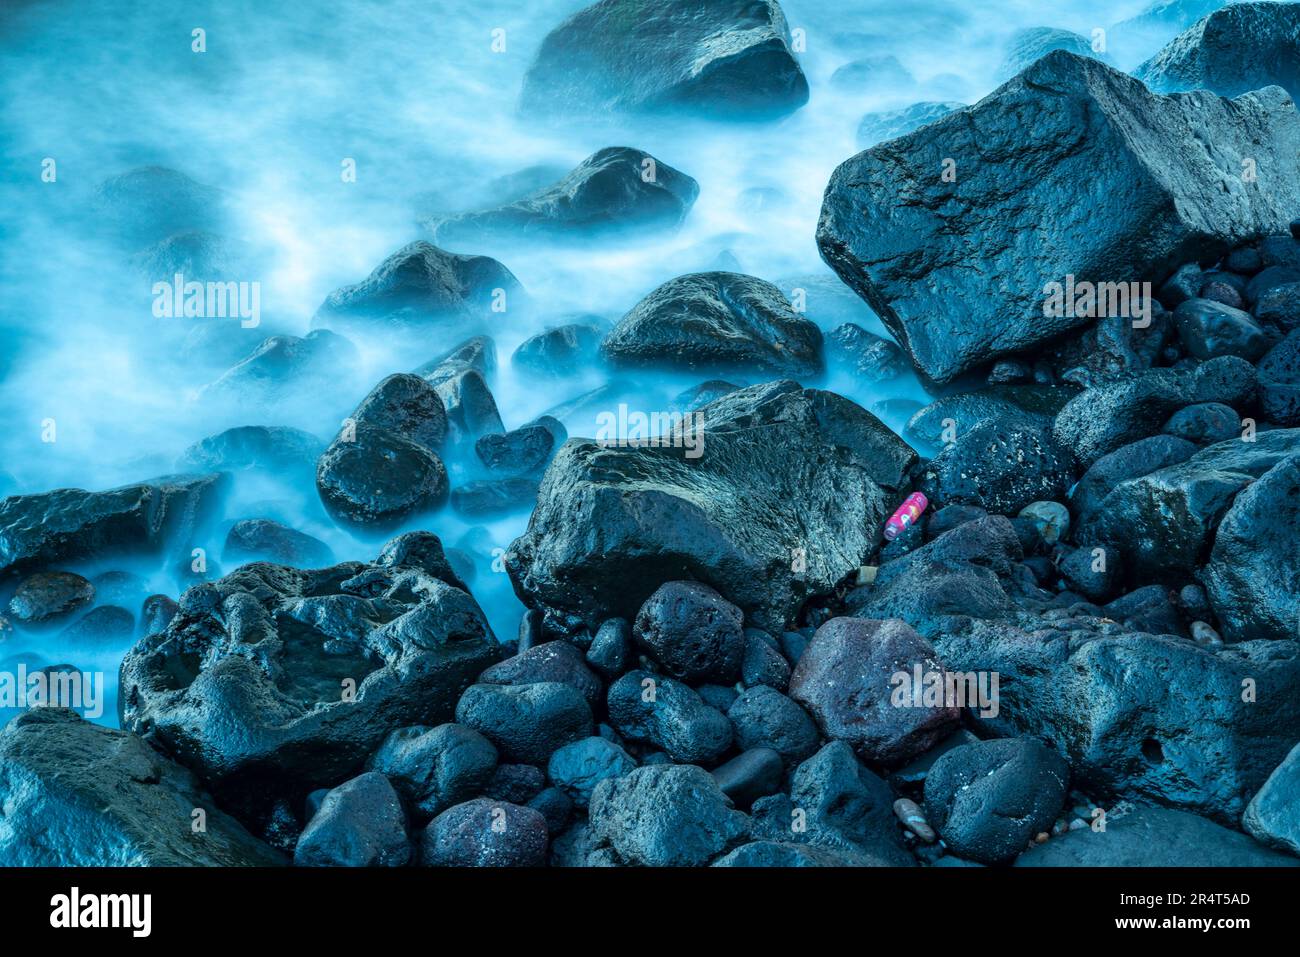 View of discareded plastic bottle and waves over stones on beach in Giardini Naxos, Sicily, Mediterranean, Italy, Europe Stock Photo